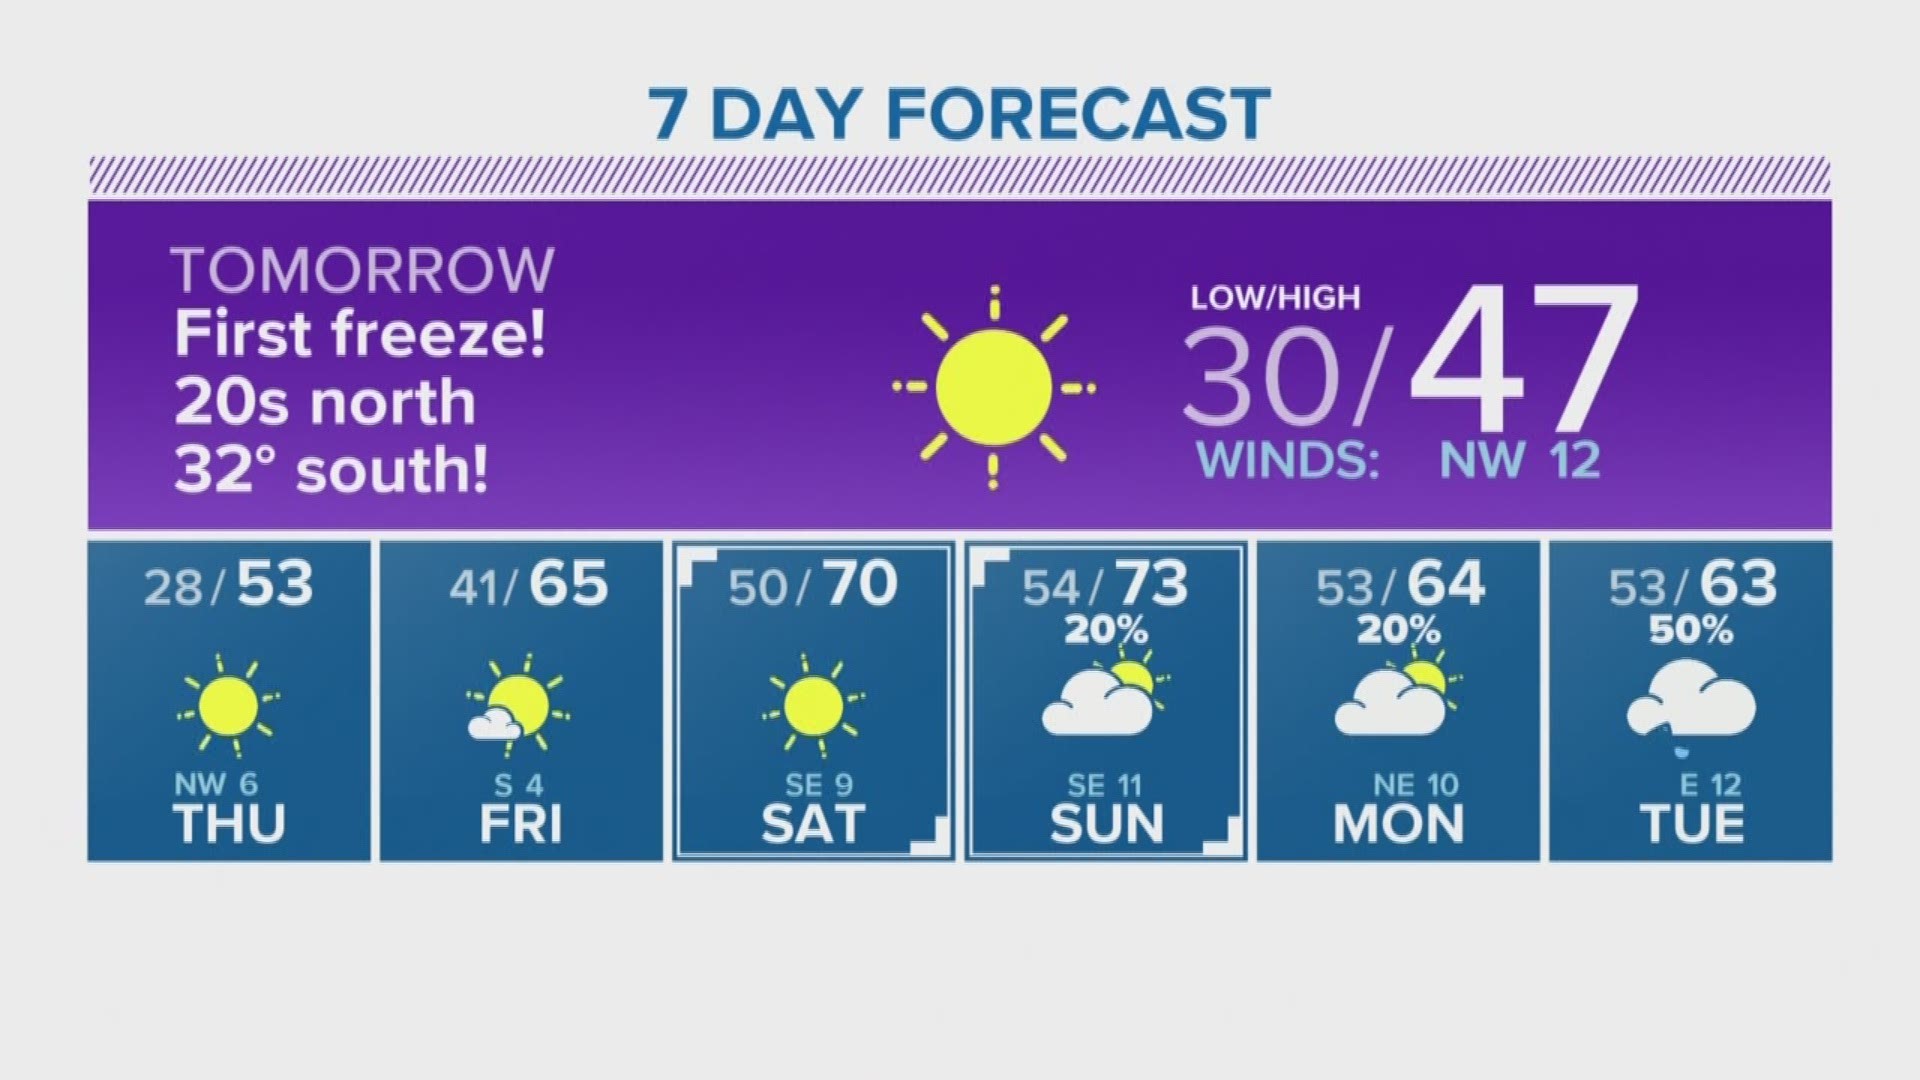 KHOU 11 Meteorologist Brooks Garner says even colder temperatures are in store for Tuesday night.